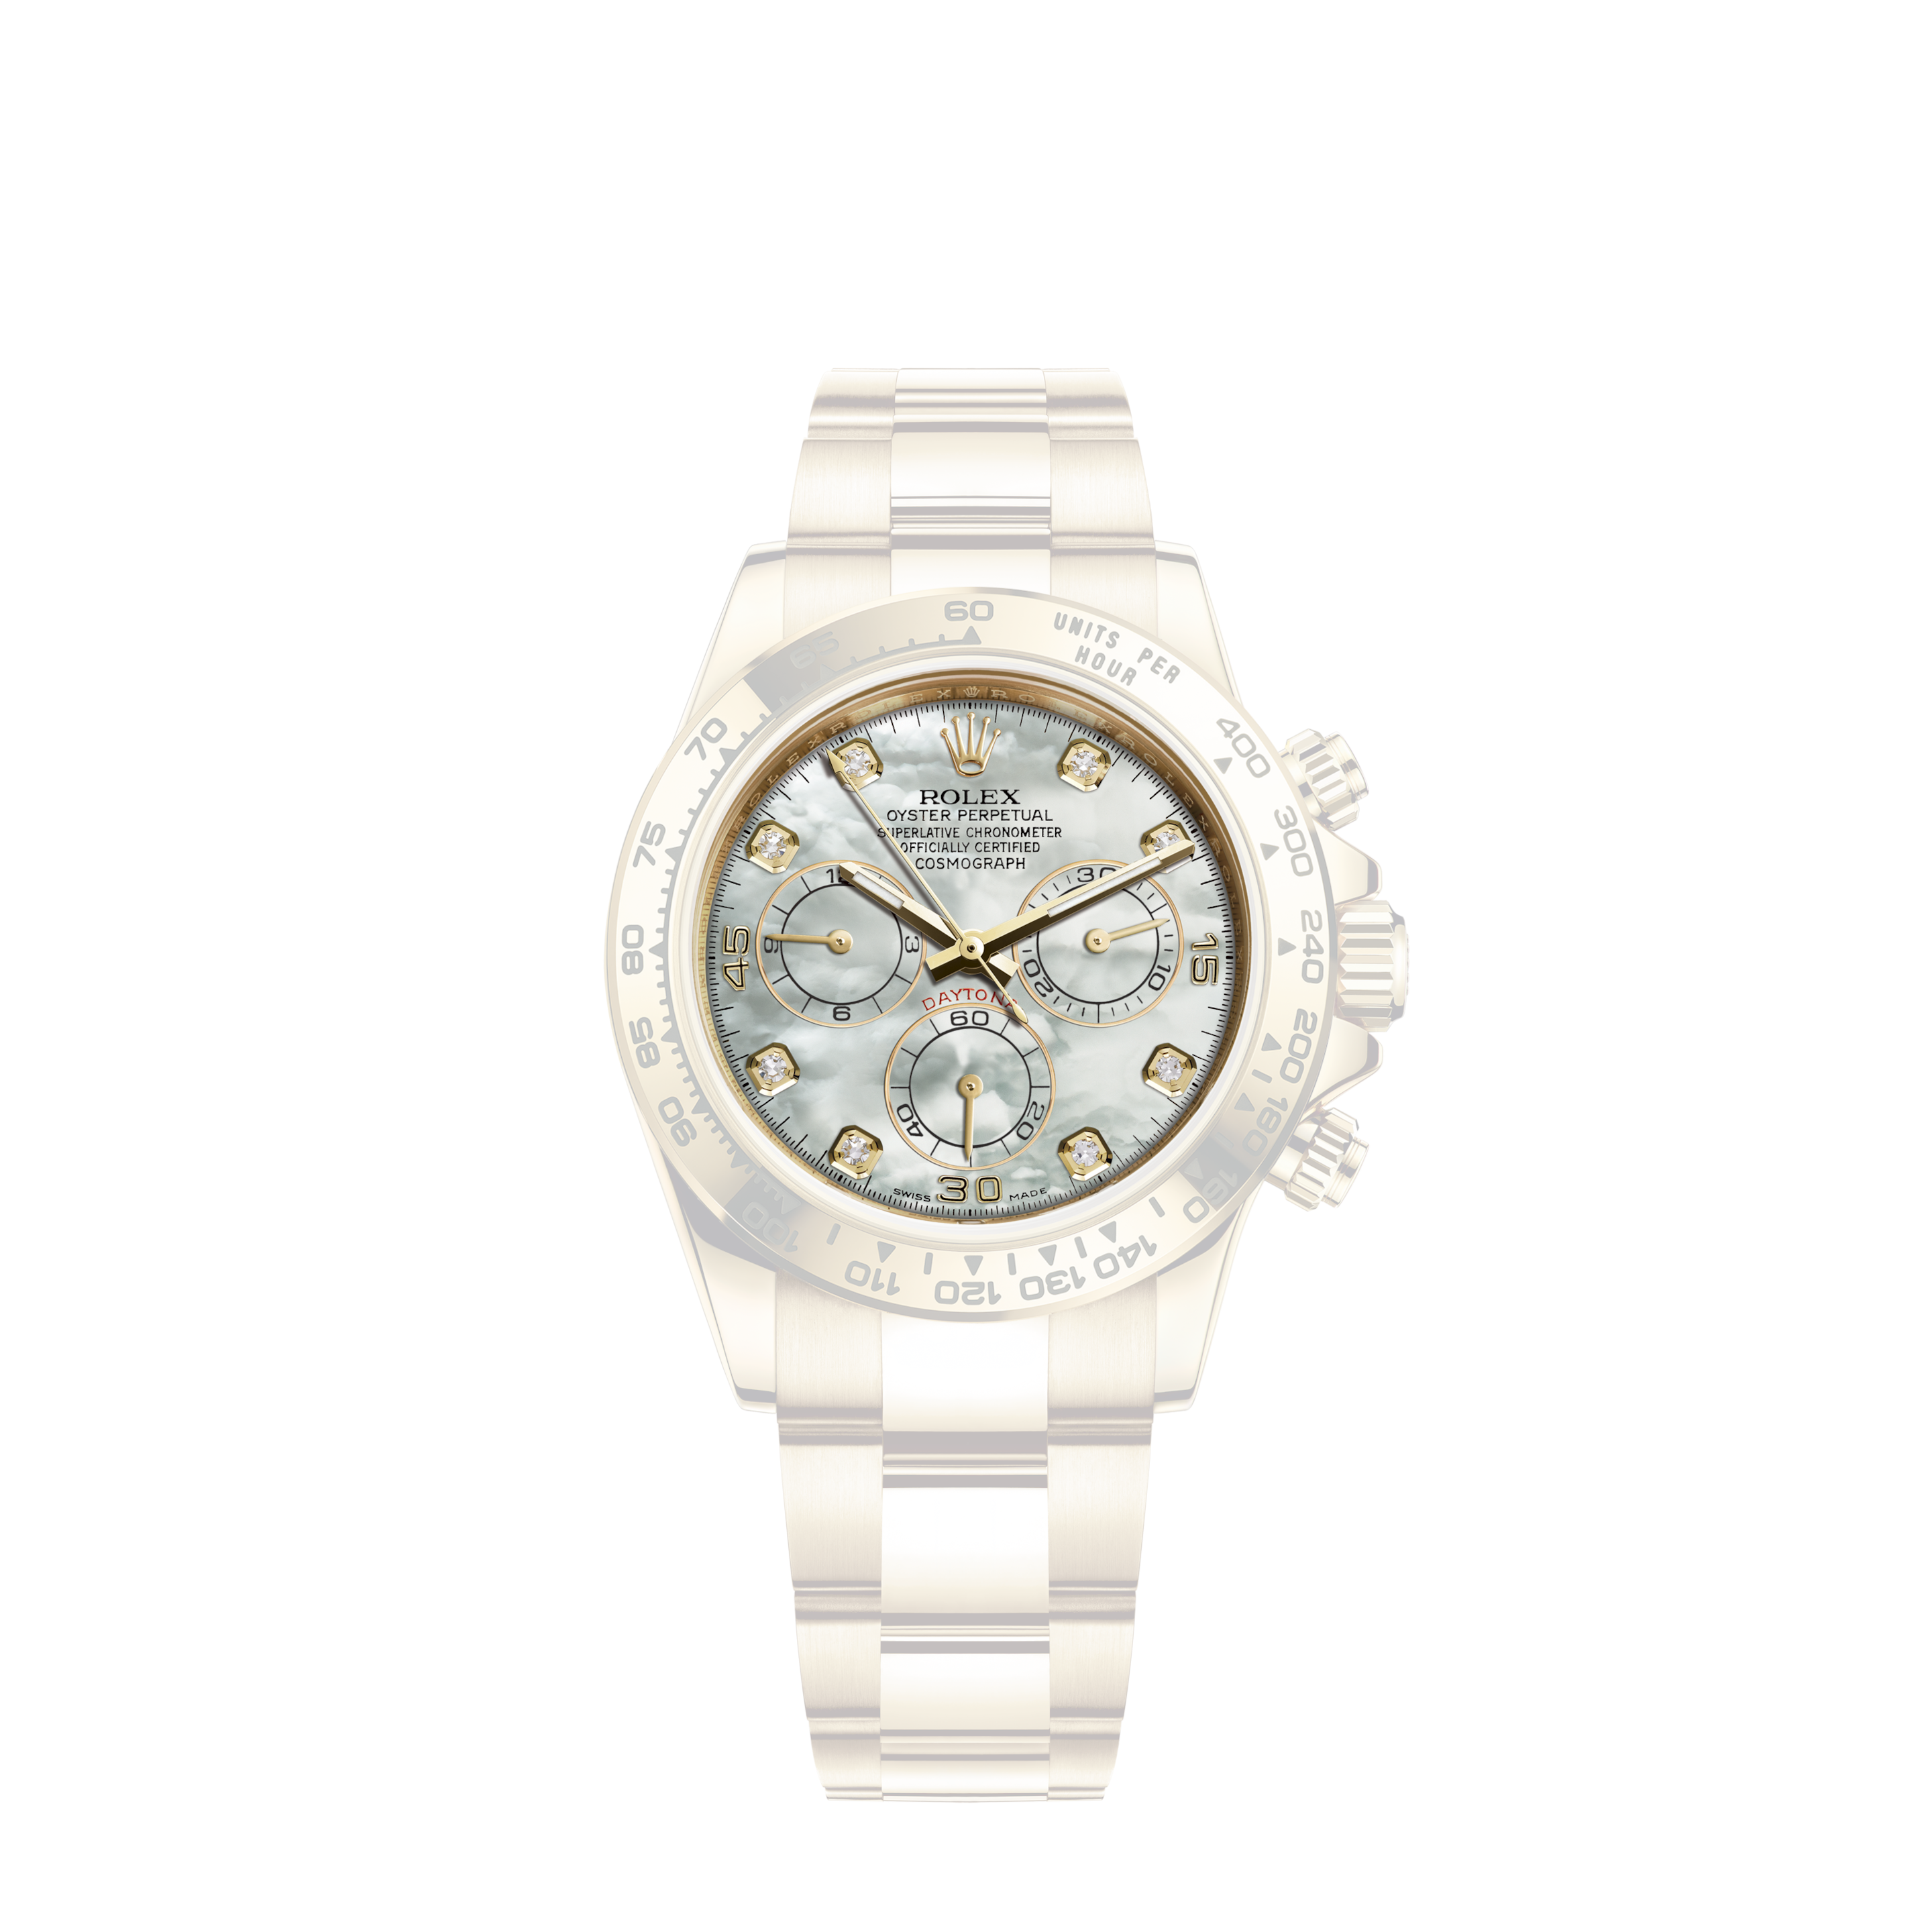 Rolex Women's Rolex 31mm Datejust Two Tone Jubilee White MOP Mother Of Pearl Dial Diamond Accent Bezel + Lugs + SapphireRolex Women's Rolex 31mm Datejust Two Tone Jubilee White MOP Mother Of Pearl Roman Numeral Dia Bezel + Lugs + Emerald